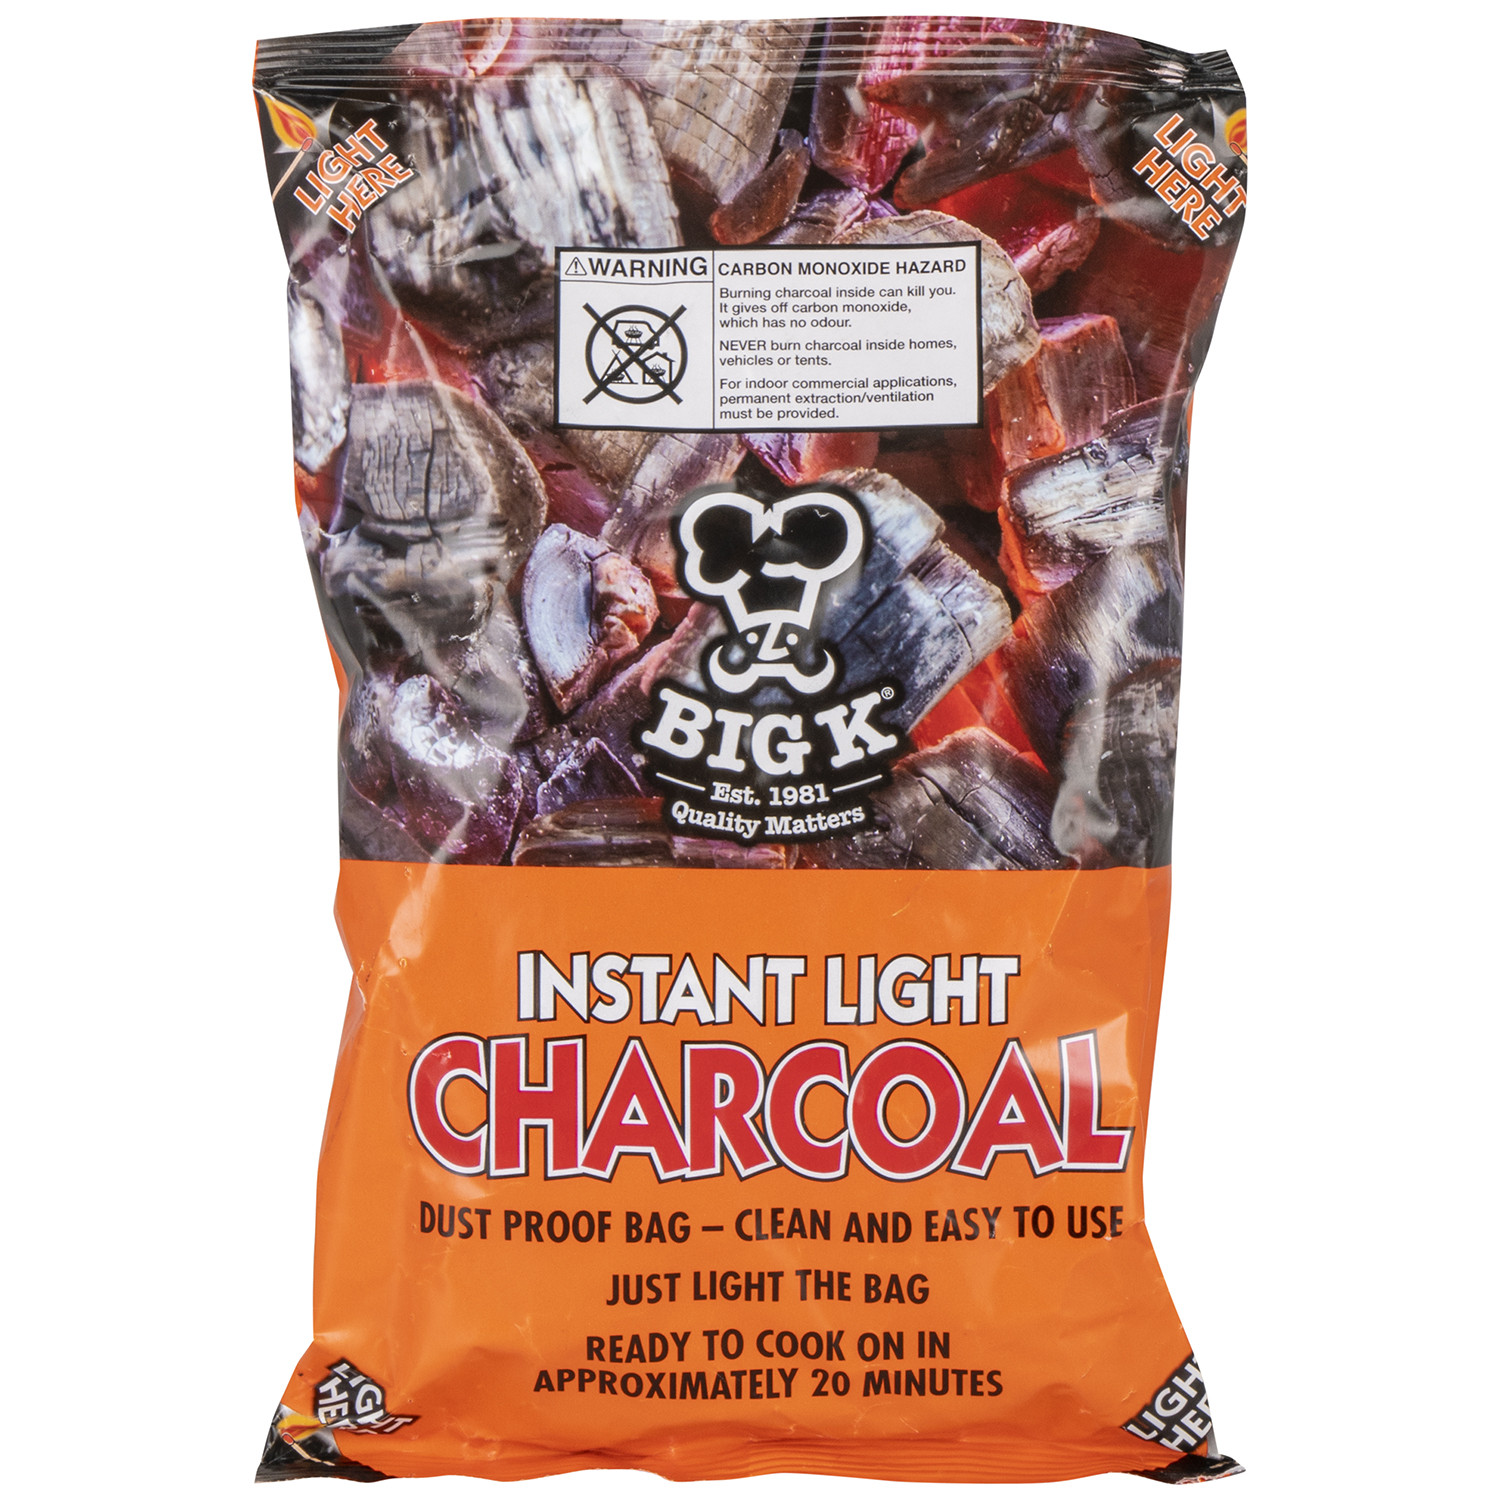 Instant Light Charcoal Bags - 1 Image